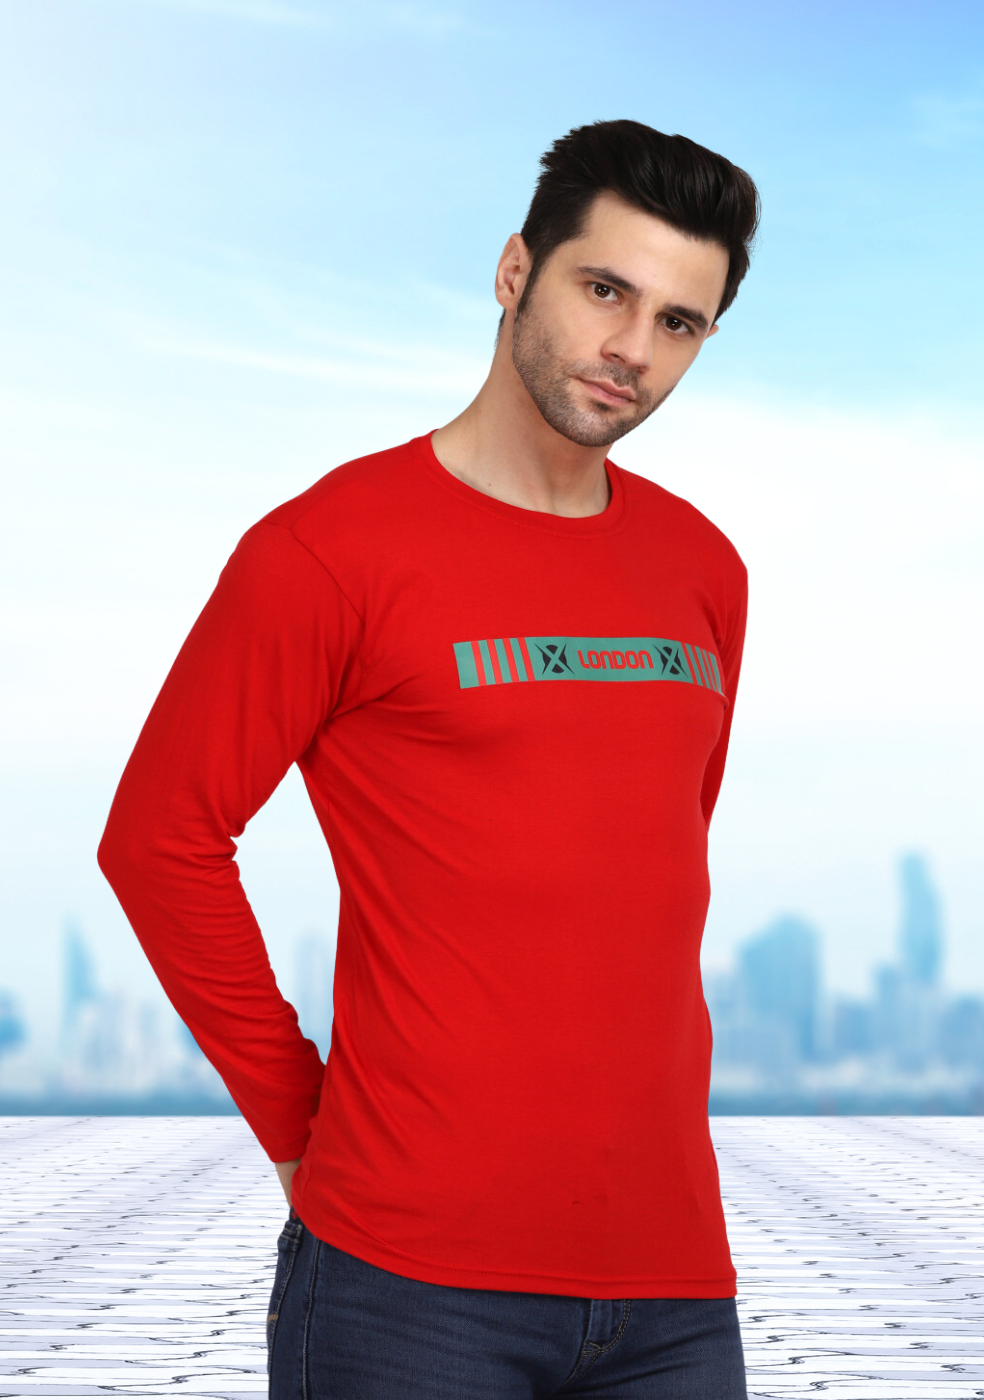 HUKH Red Slim Fit Cotton Lycra T Shirt Full Sleeve Round Neck For Men